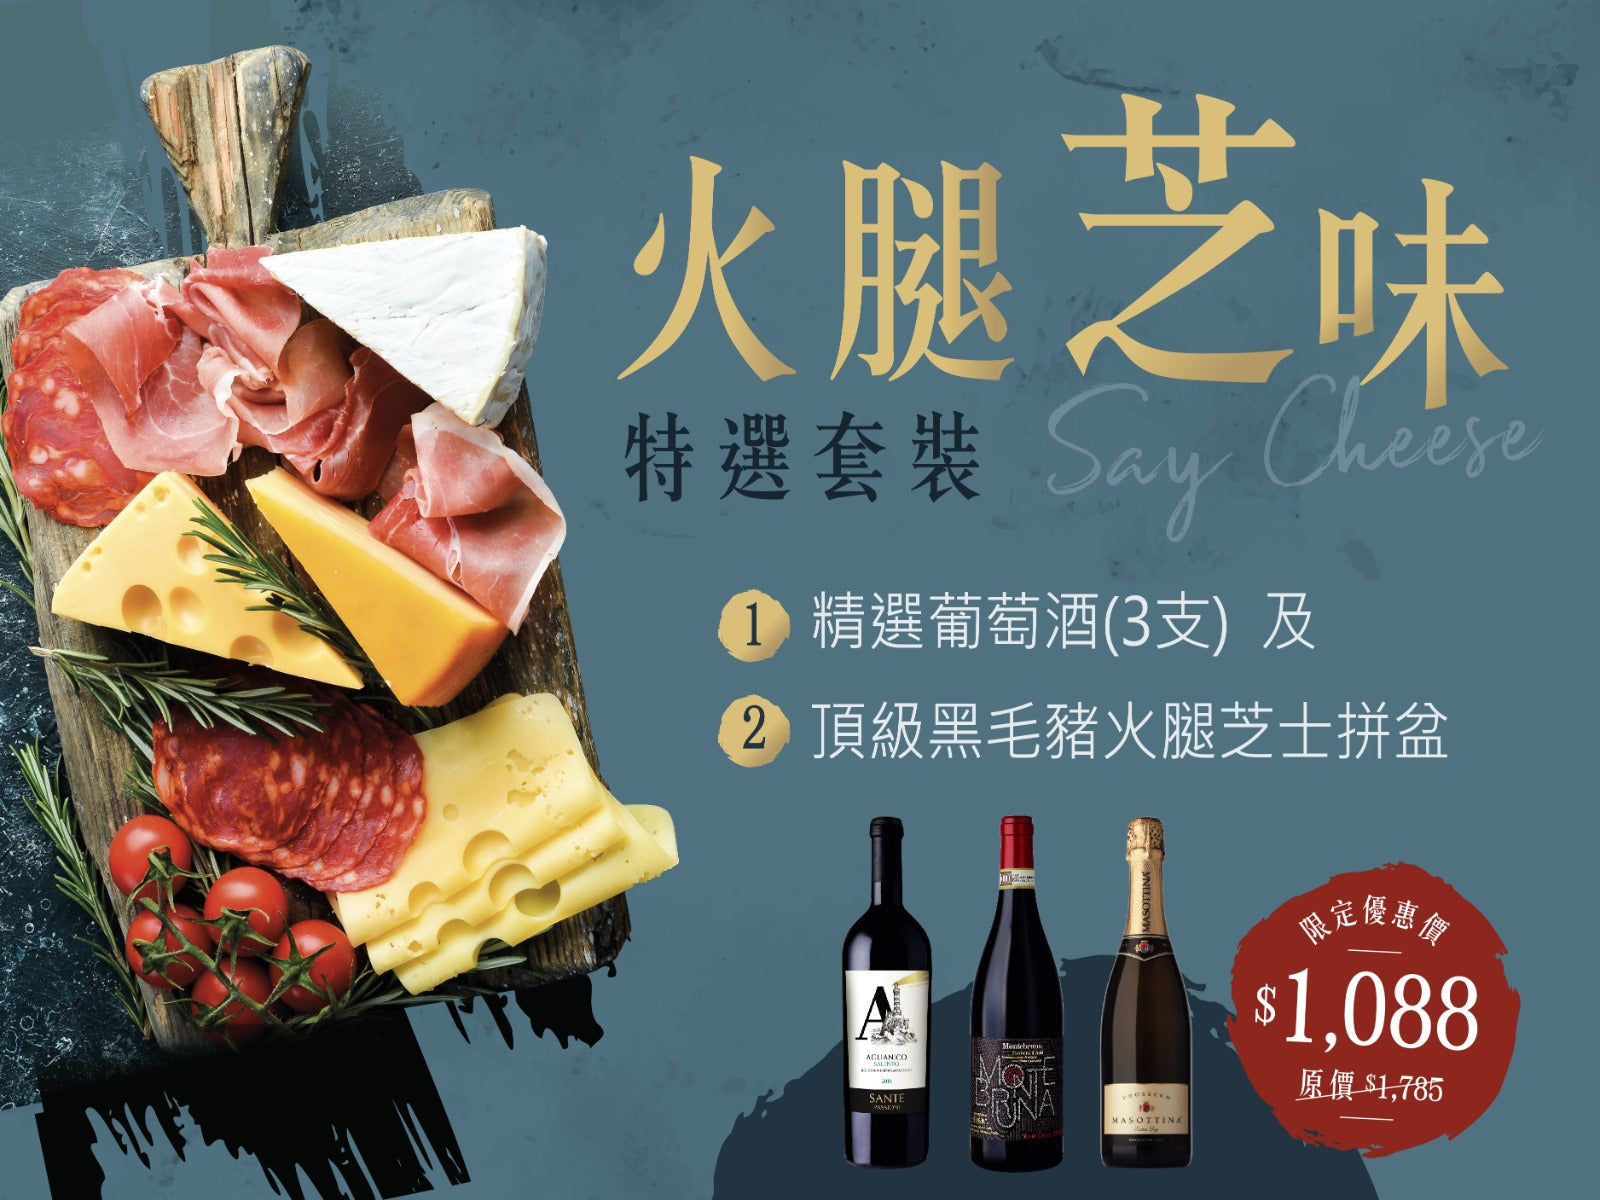 【Ham and Cheese Special Set】Say Cheese Selected Wine 3 Bottles and Premium Black Pork Ham and Cheese Platter (Original Price $1785)